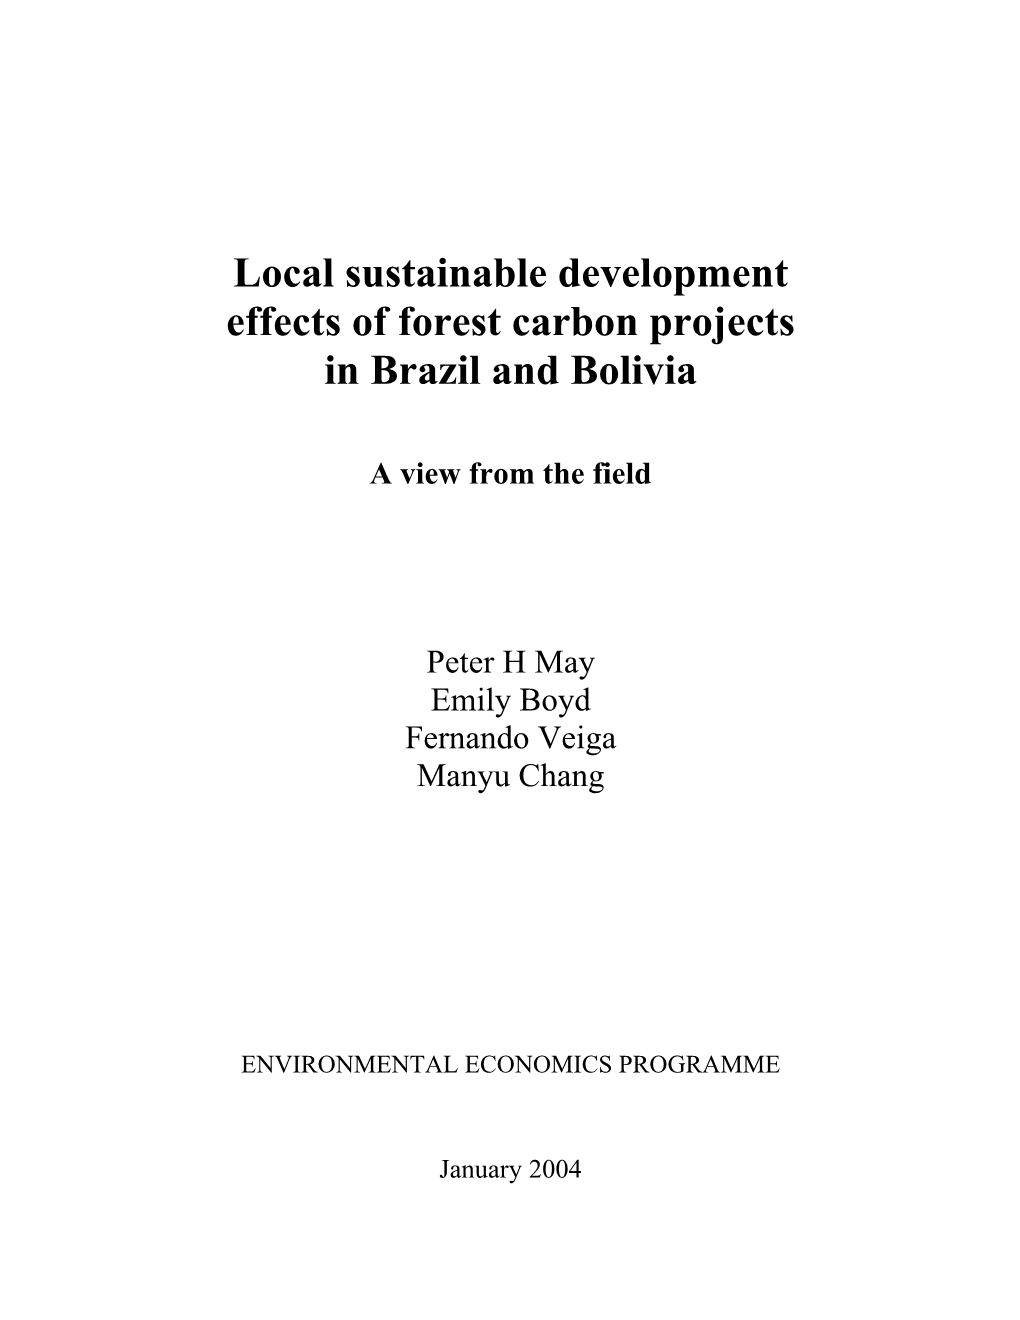 Local Sustainable Development Effects of Forest Carbon Projects in Brazil and Bolivia